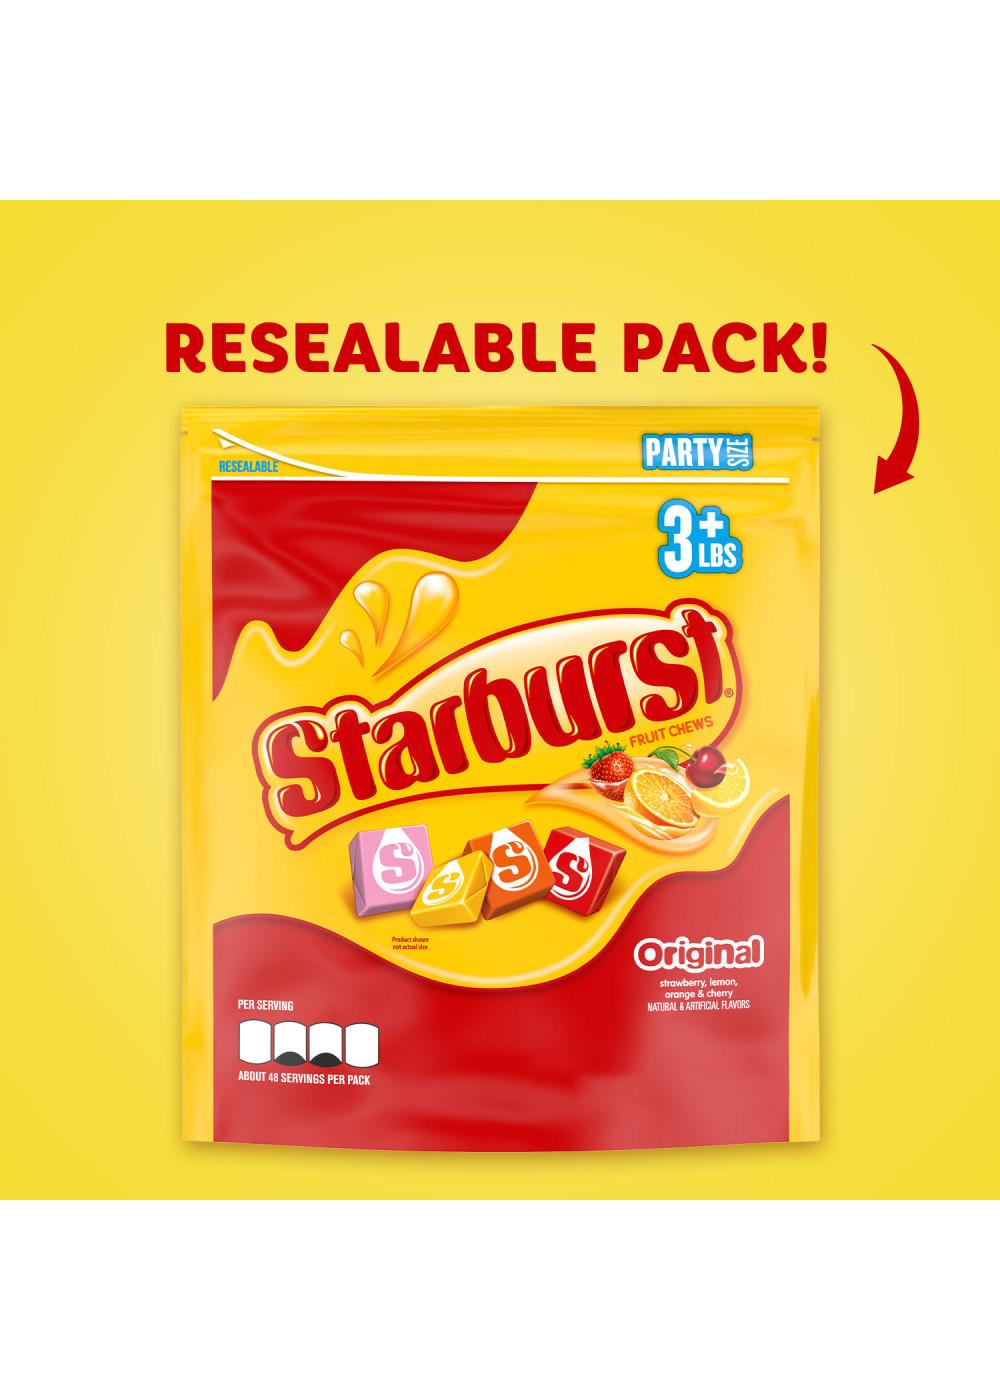 Starburst Original Fruit Chews Candy - Party Size; image 5 of 5